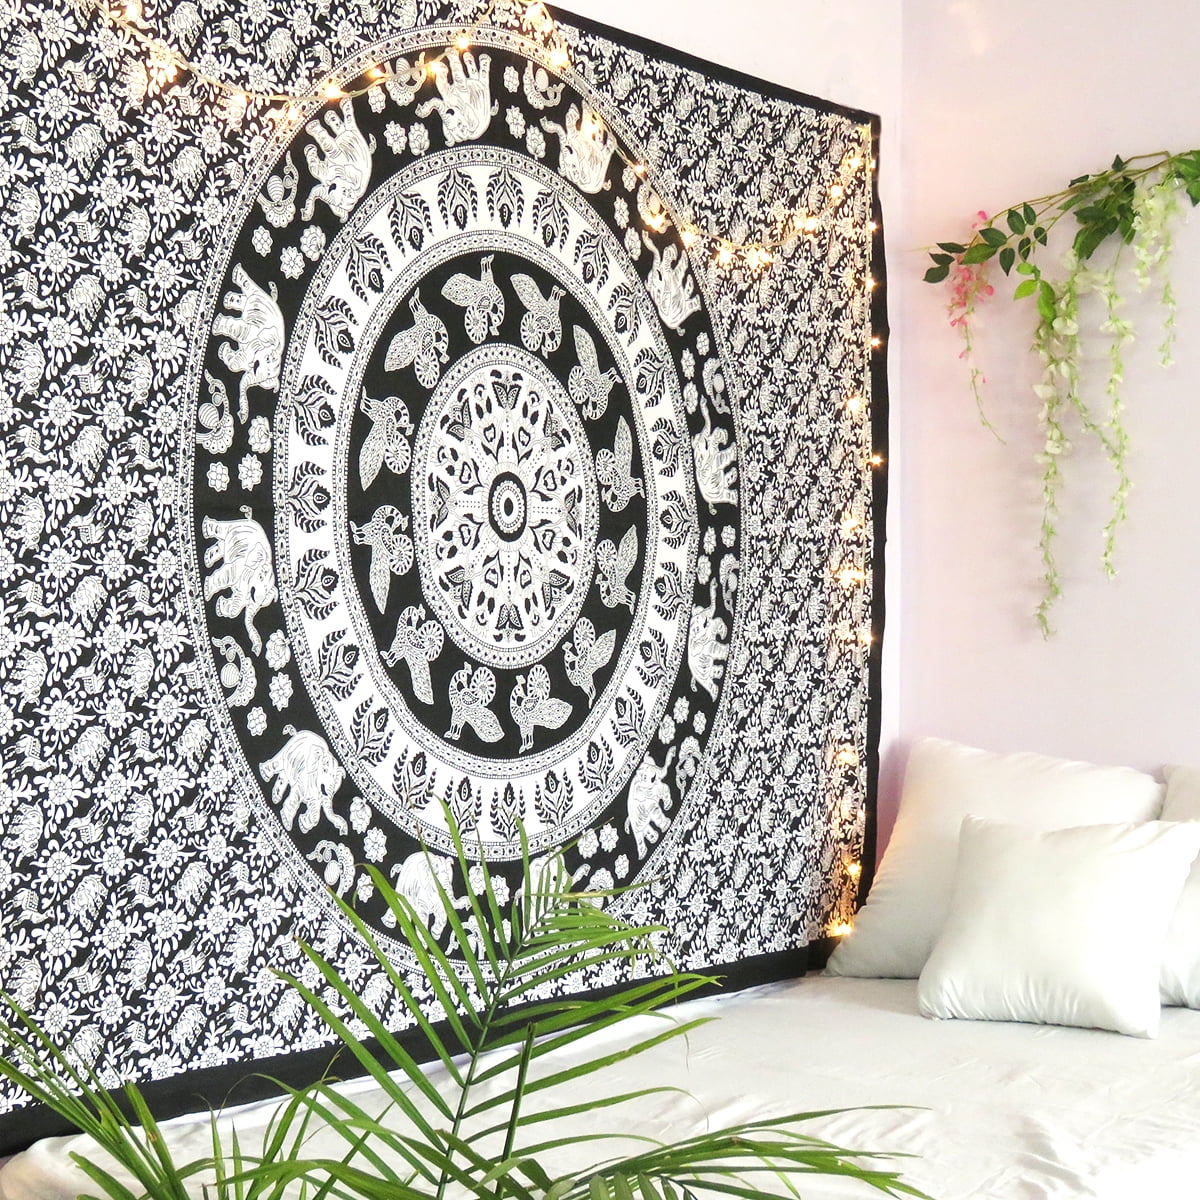 Indian Mandala Tapestry Hippie Wall Hanging Twin Size Bedspread Ombre Dorm Decor 